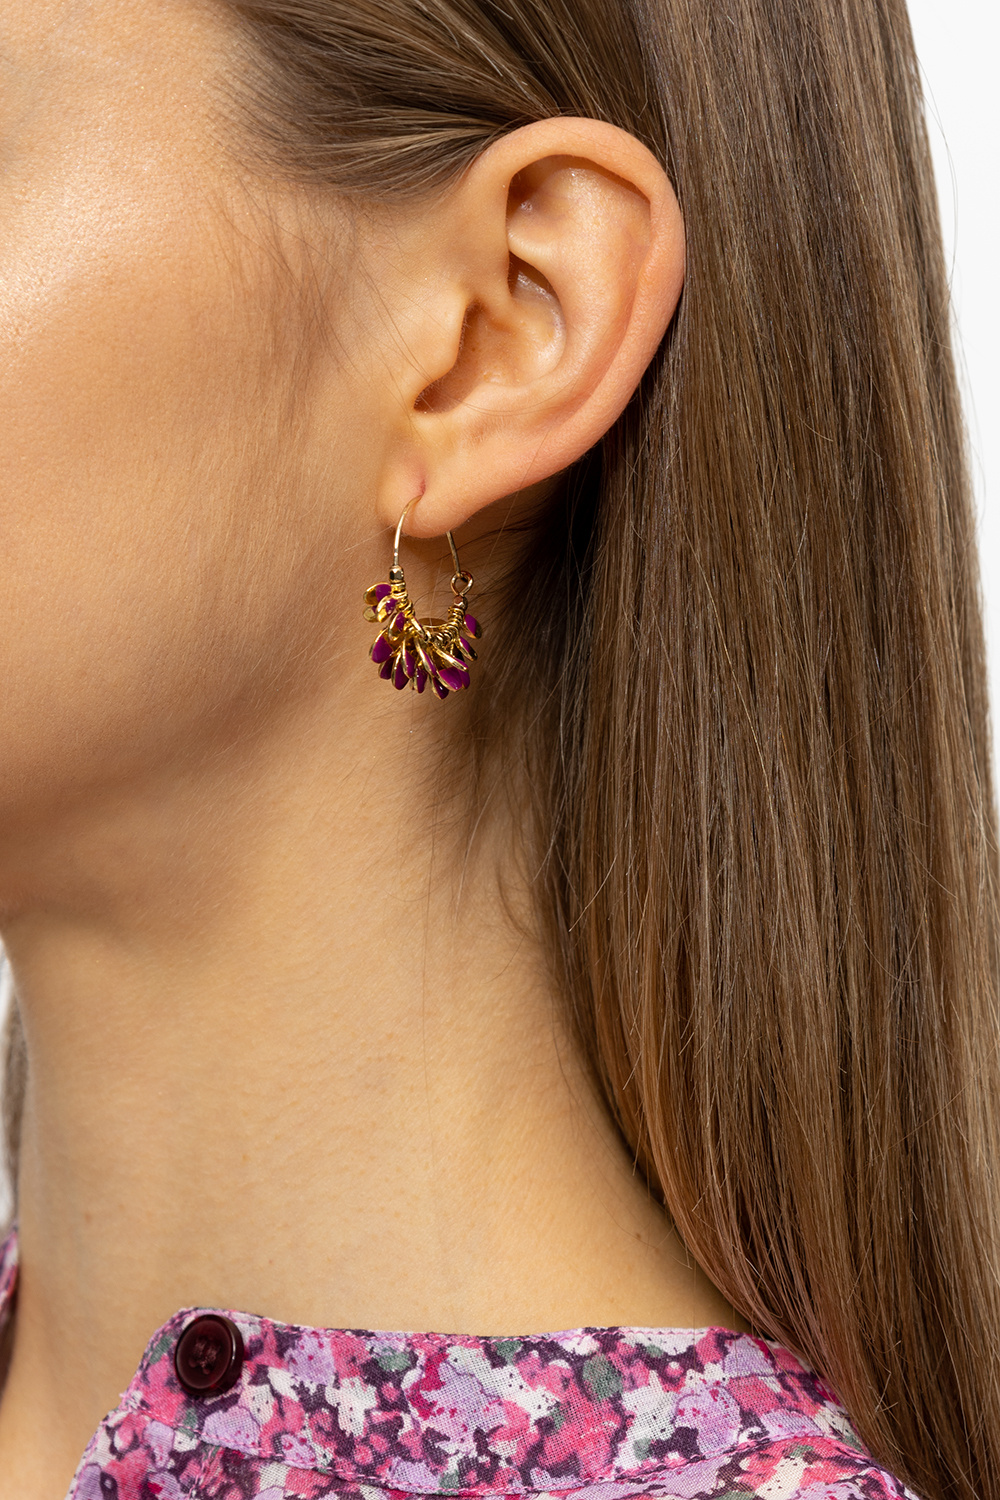 Isabel Marant Hoop earrings with charms